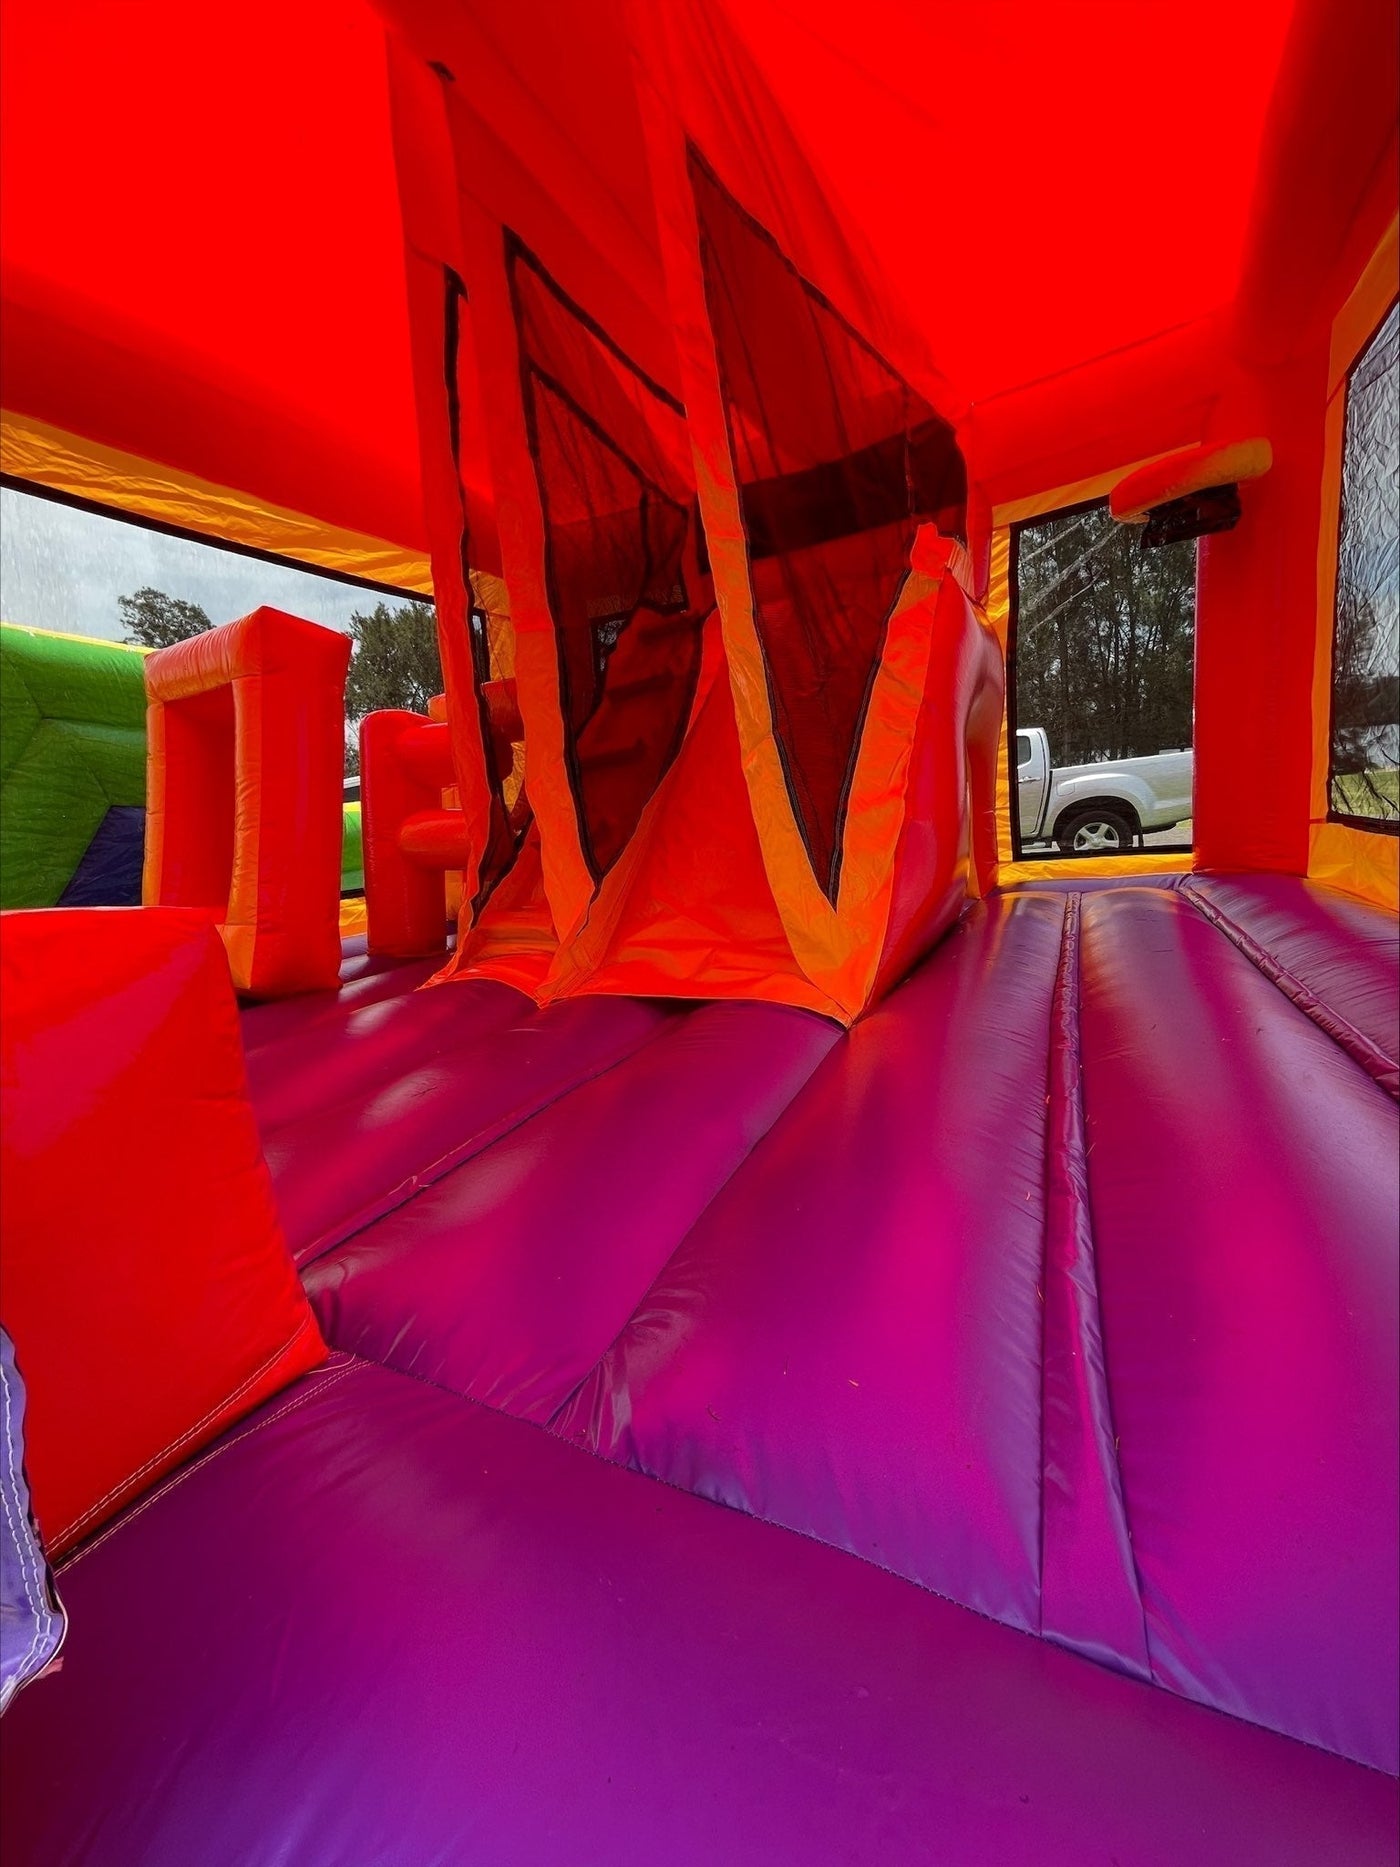 Dora Movie Extra Large Obstacle Combo Jumping Castle